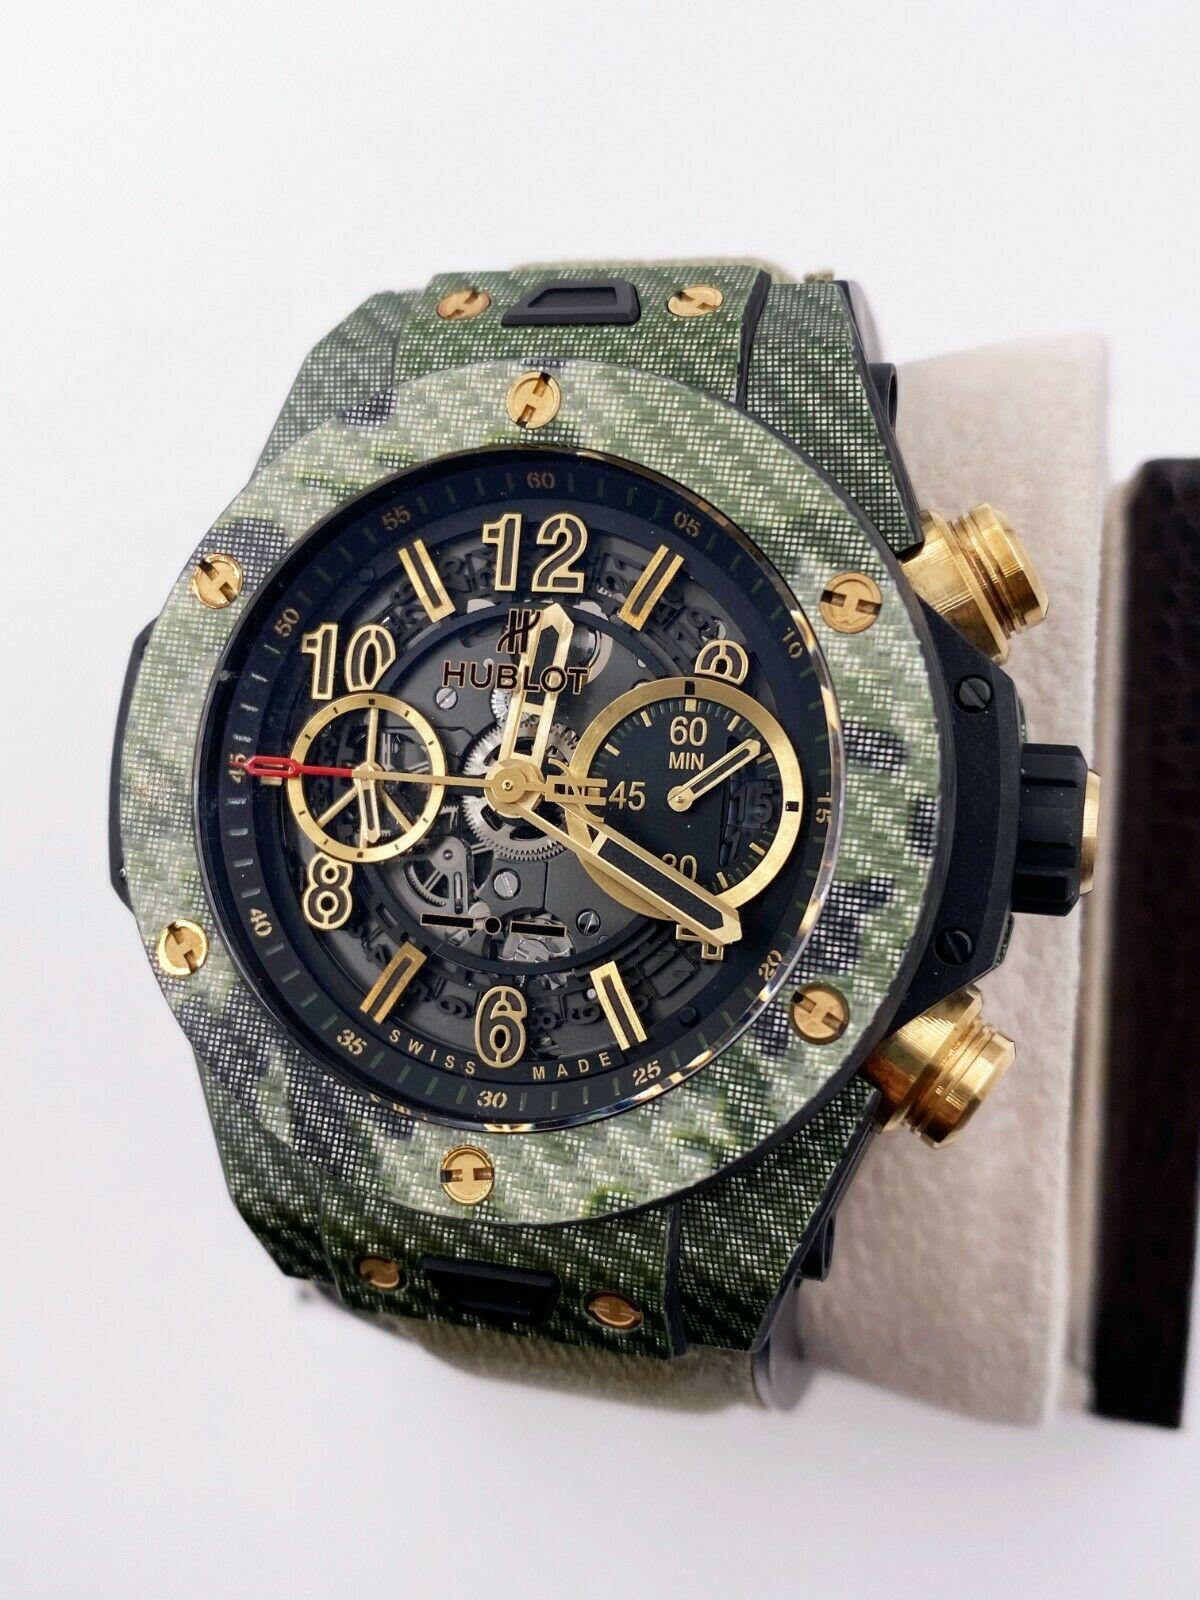 Hublot 45mm Big Bang Unico Chronograph 411.YG.1198.NR.ITI16 Carbon Fiber Camo In Excellent Condition For Sale In San Diego, CA